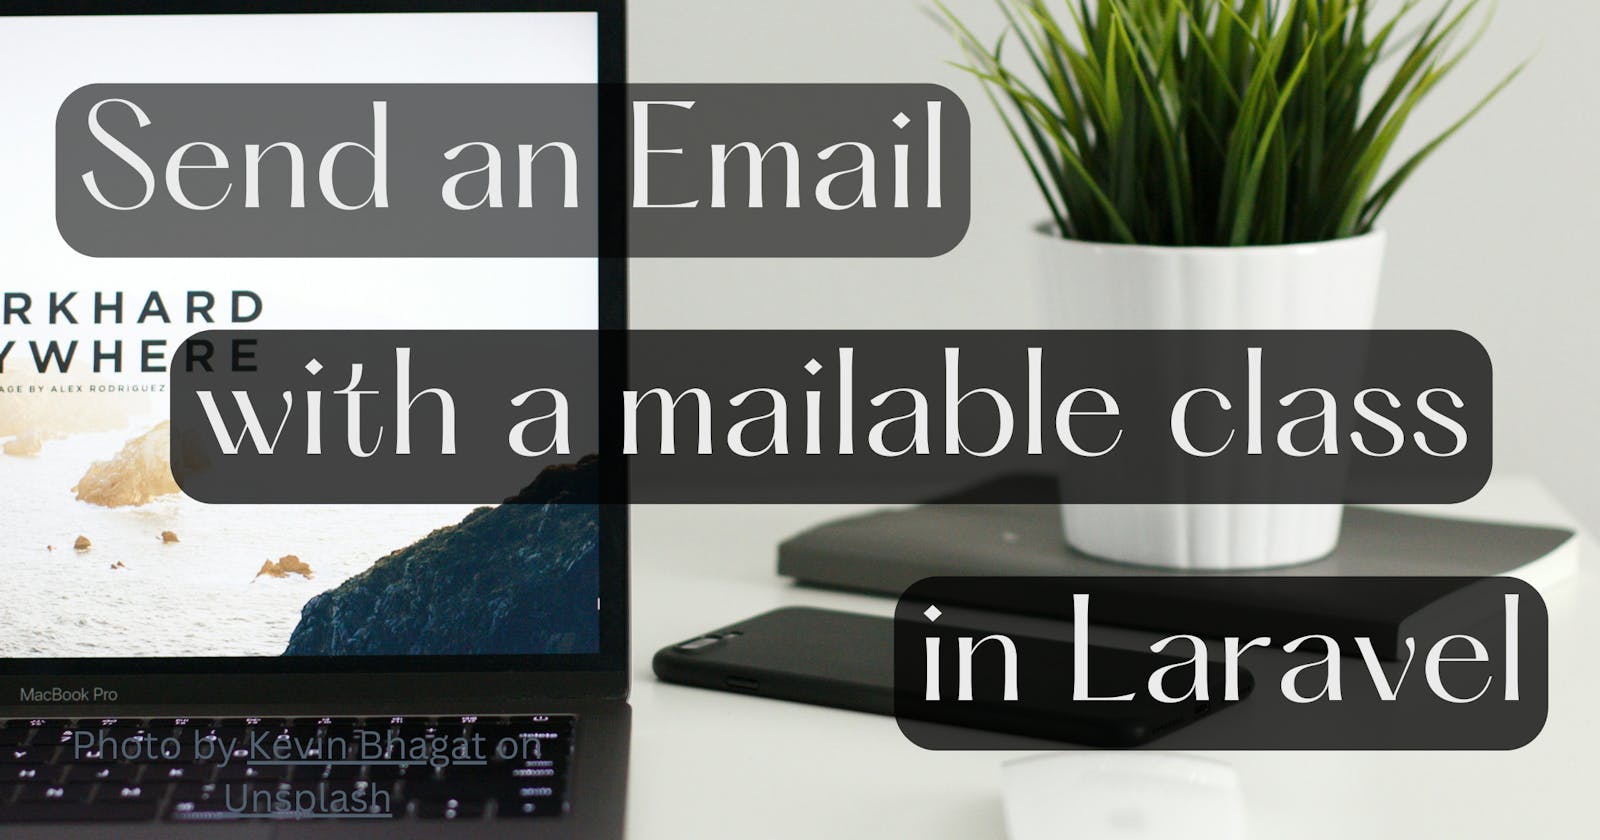 Send an email with a mailable class in laravel.